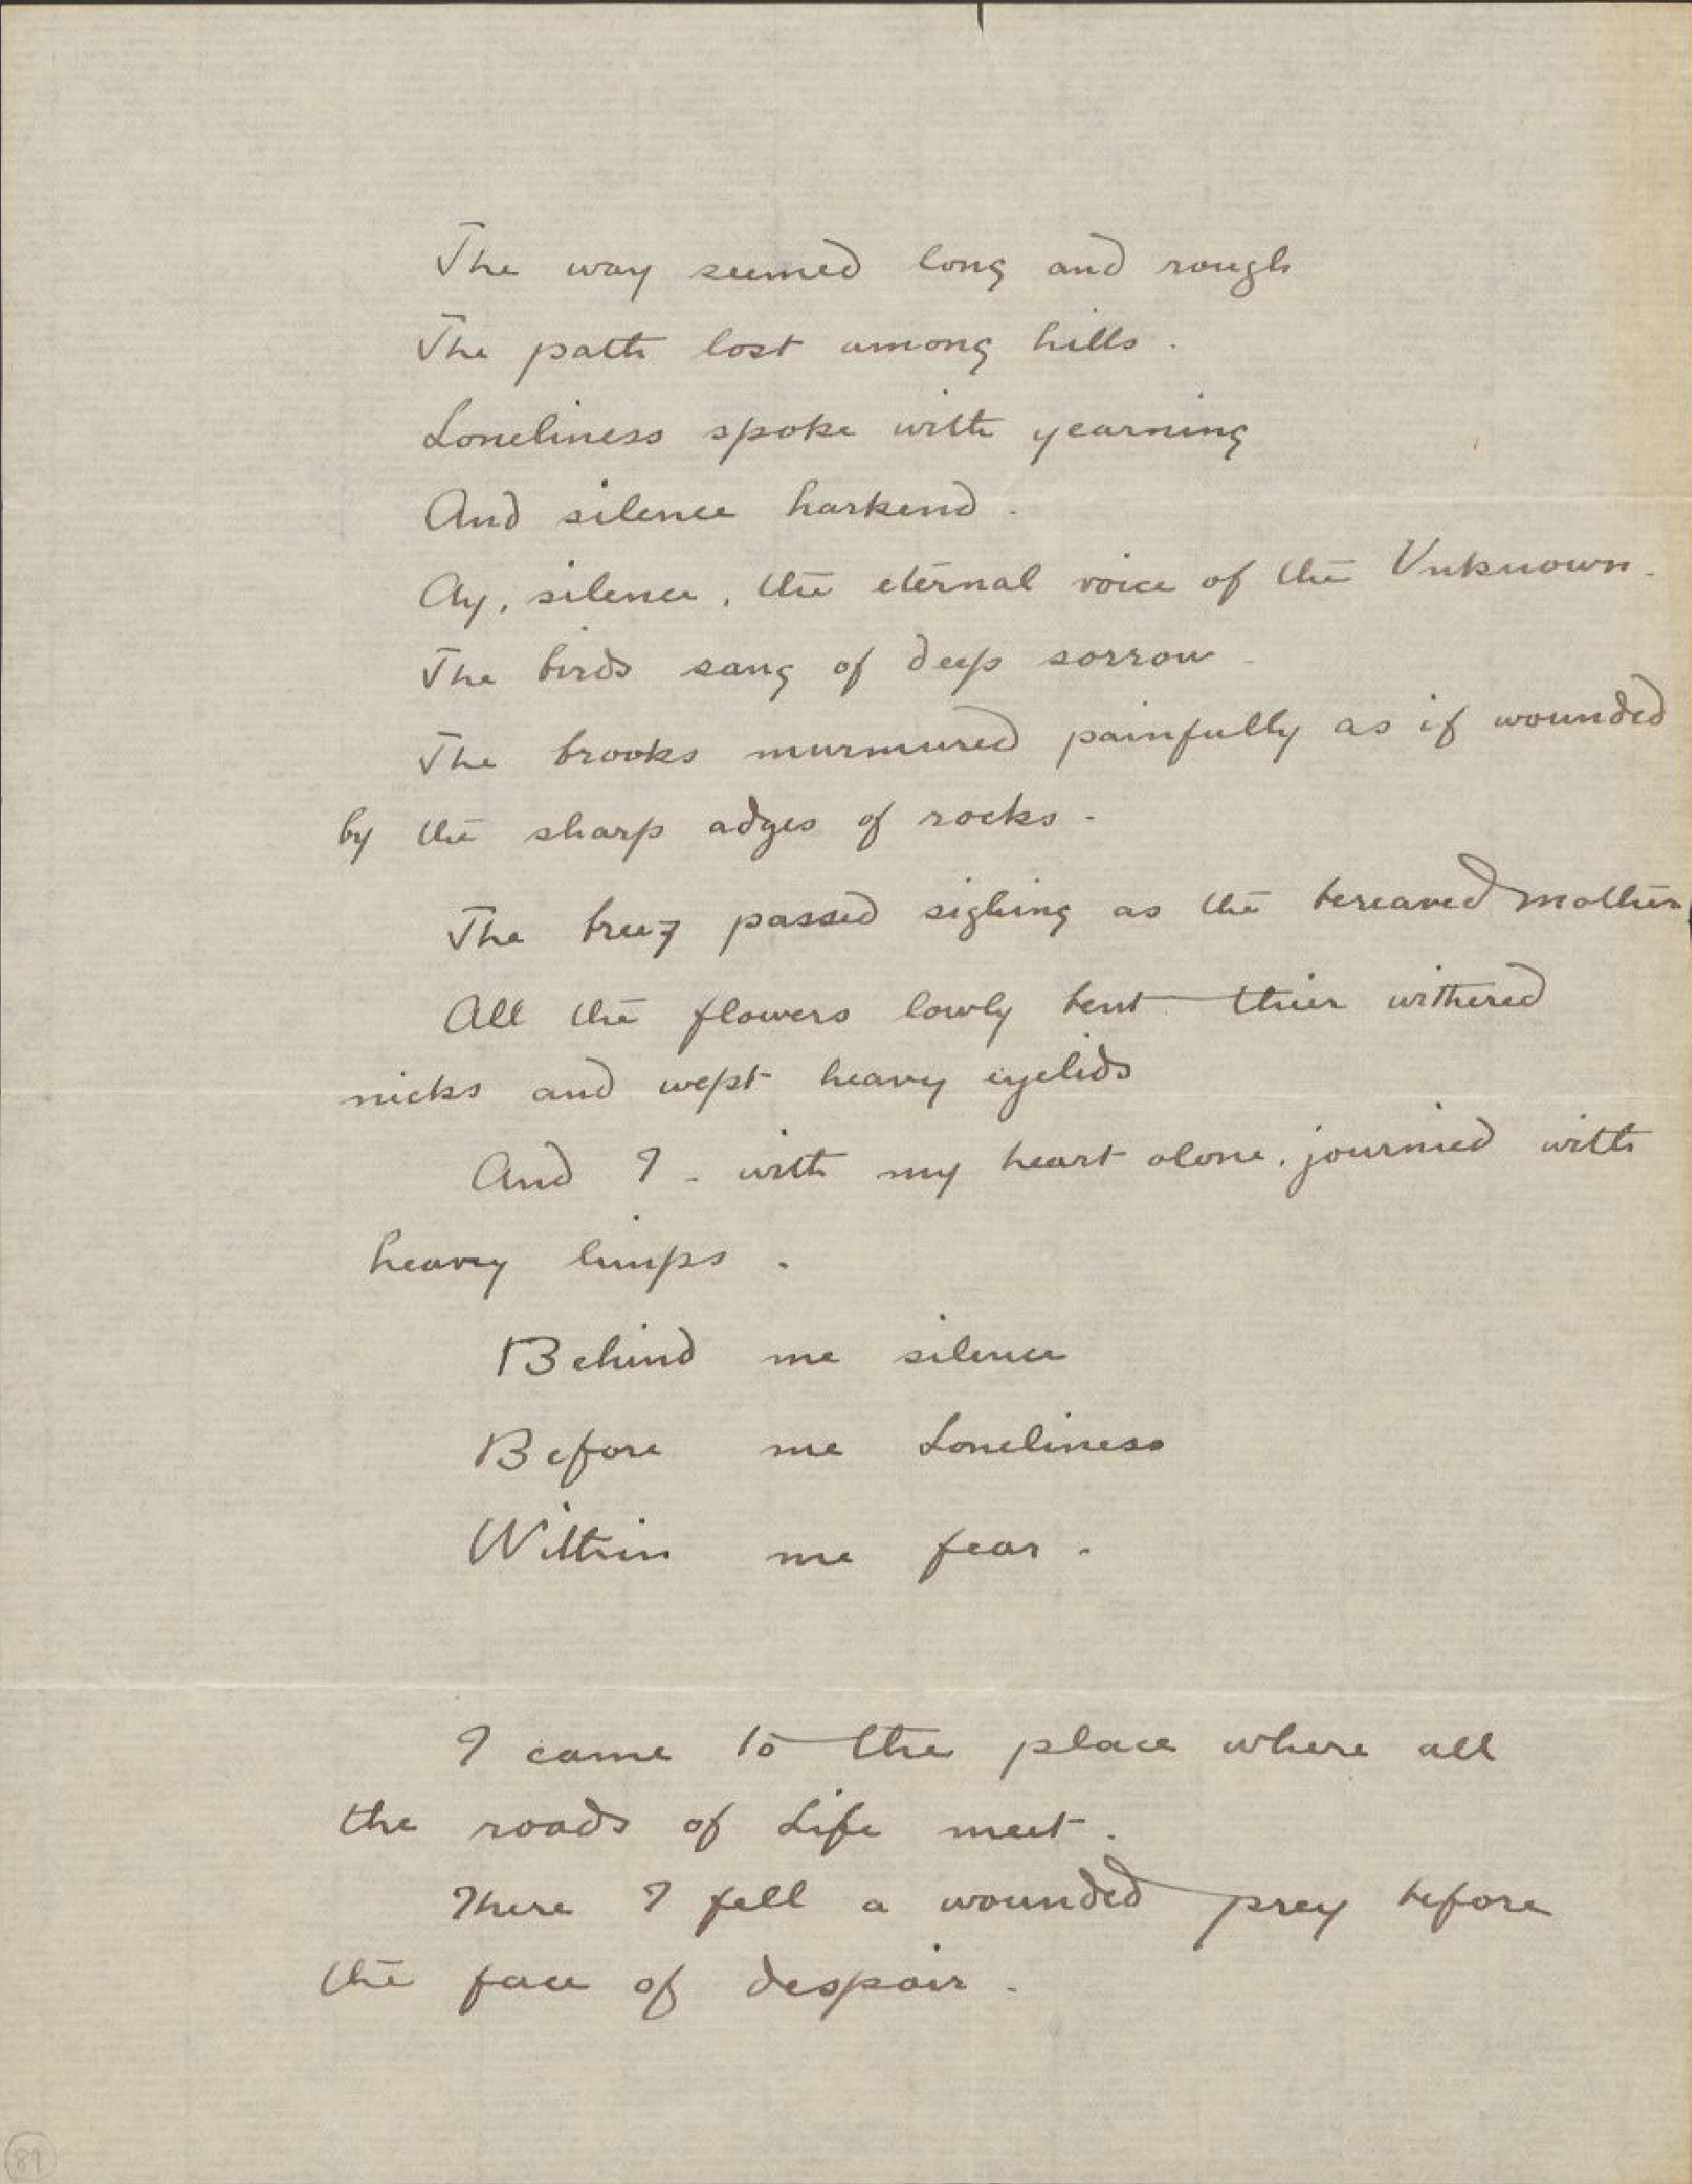 The Way Seemed Long and Rough (Unpublished Manuscript), Josephine Preston Peabody papers